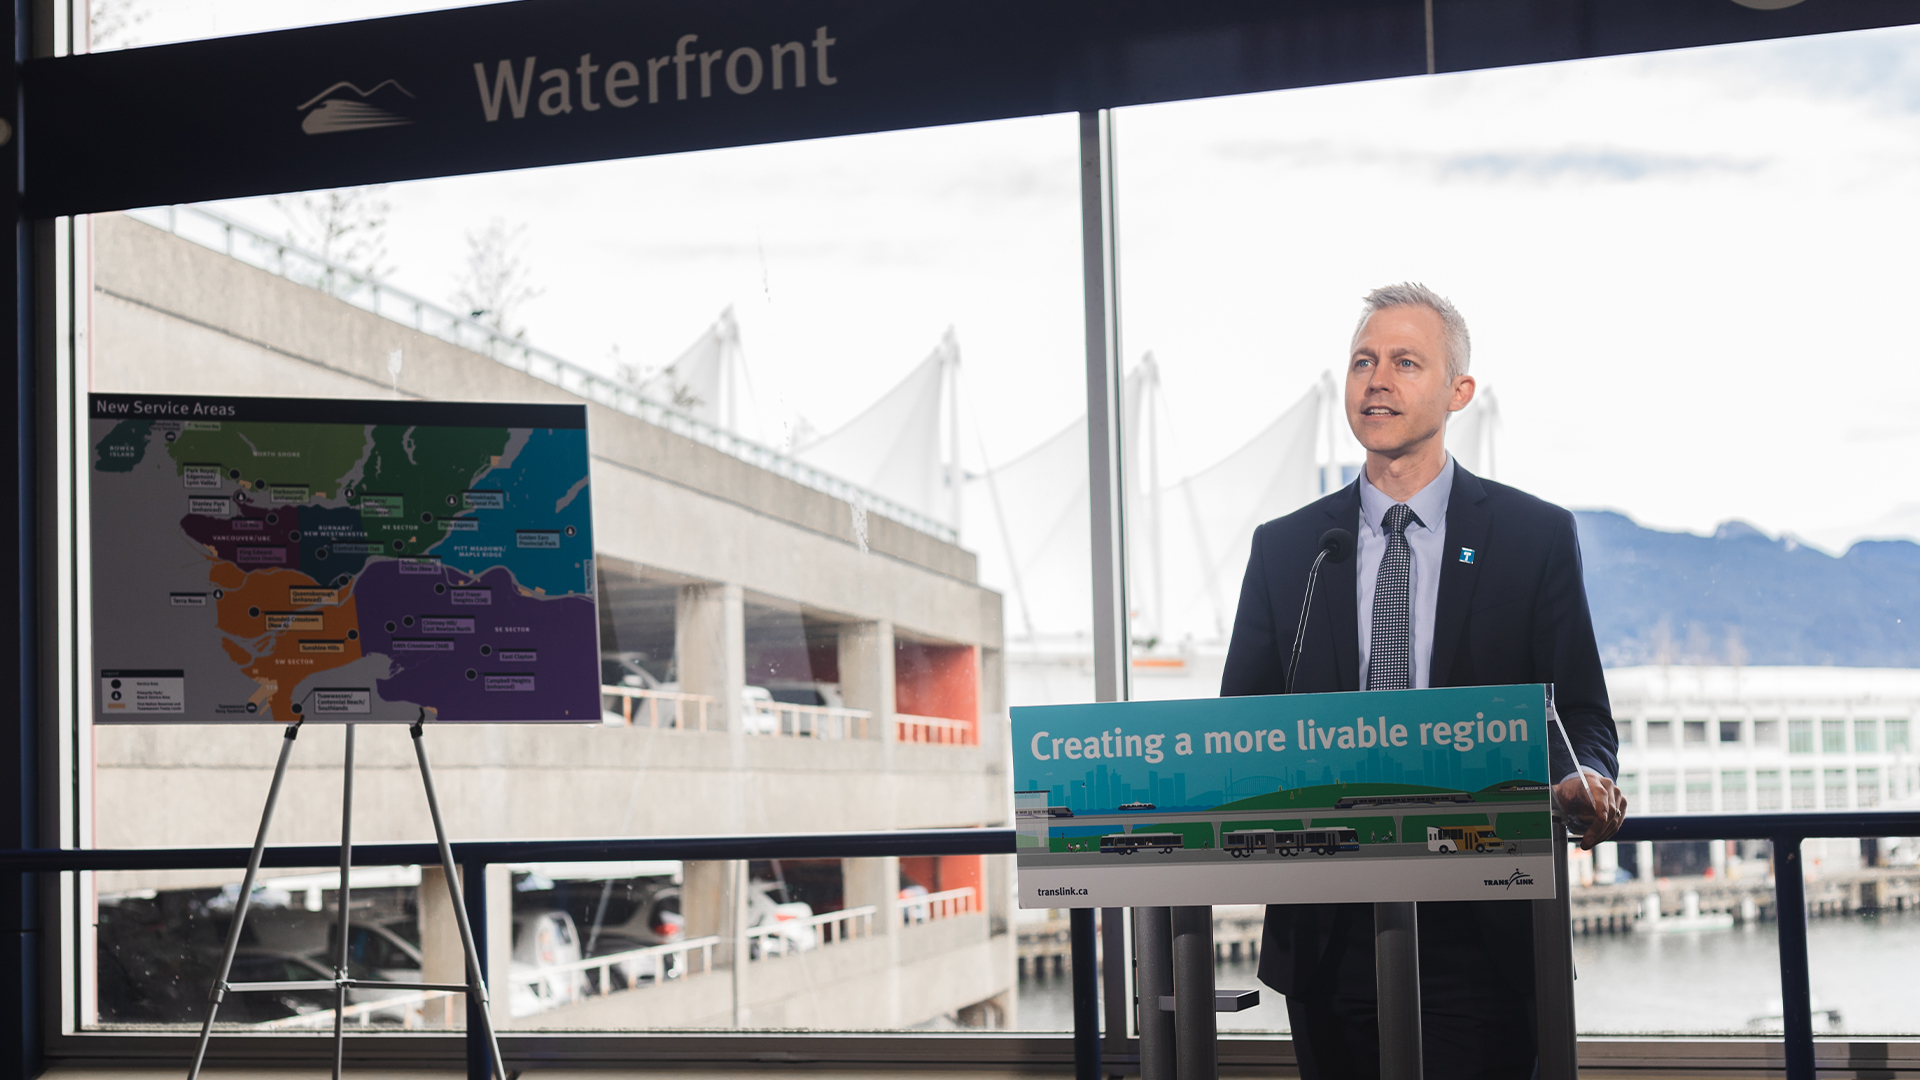 Kevin Quinn speaking on a podium during the 10-Year Priorities media event at Waterfront Station